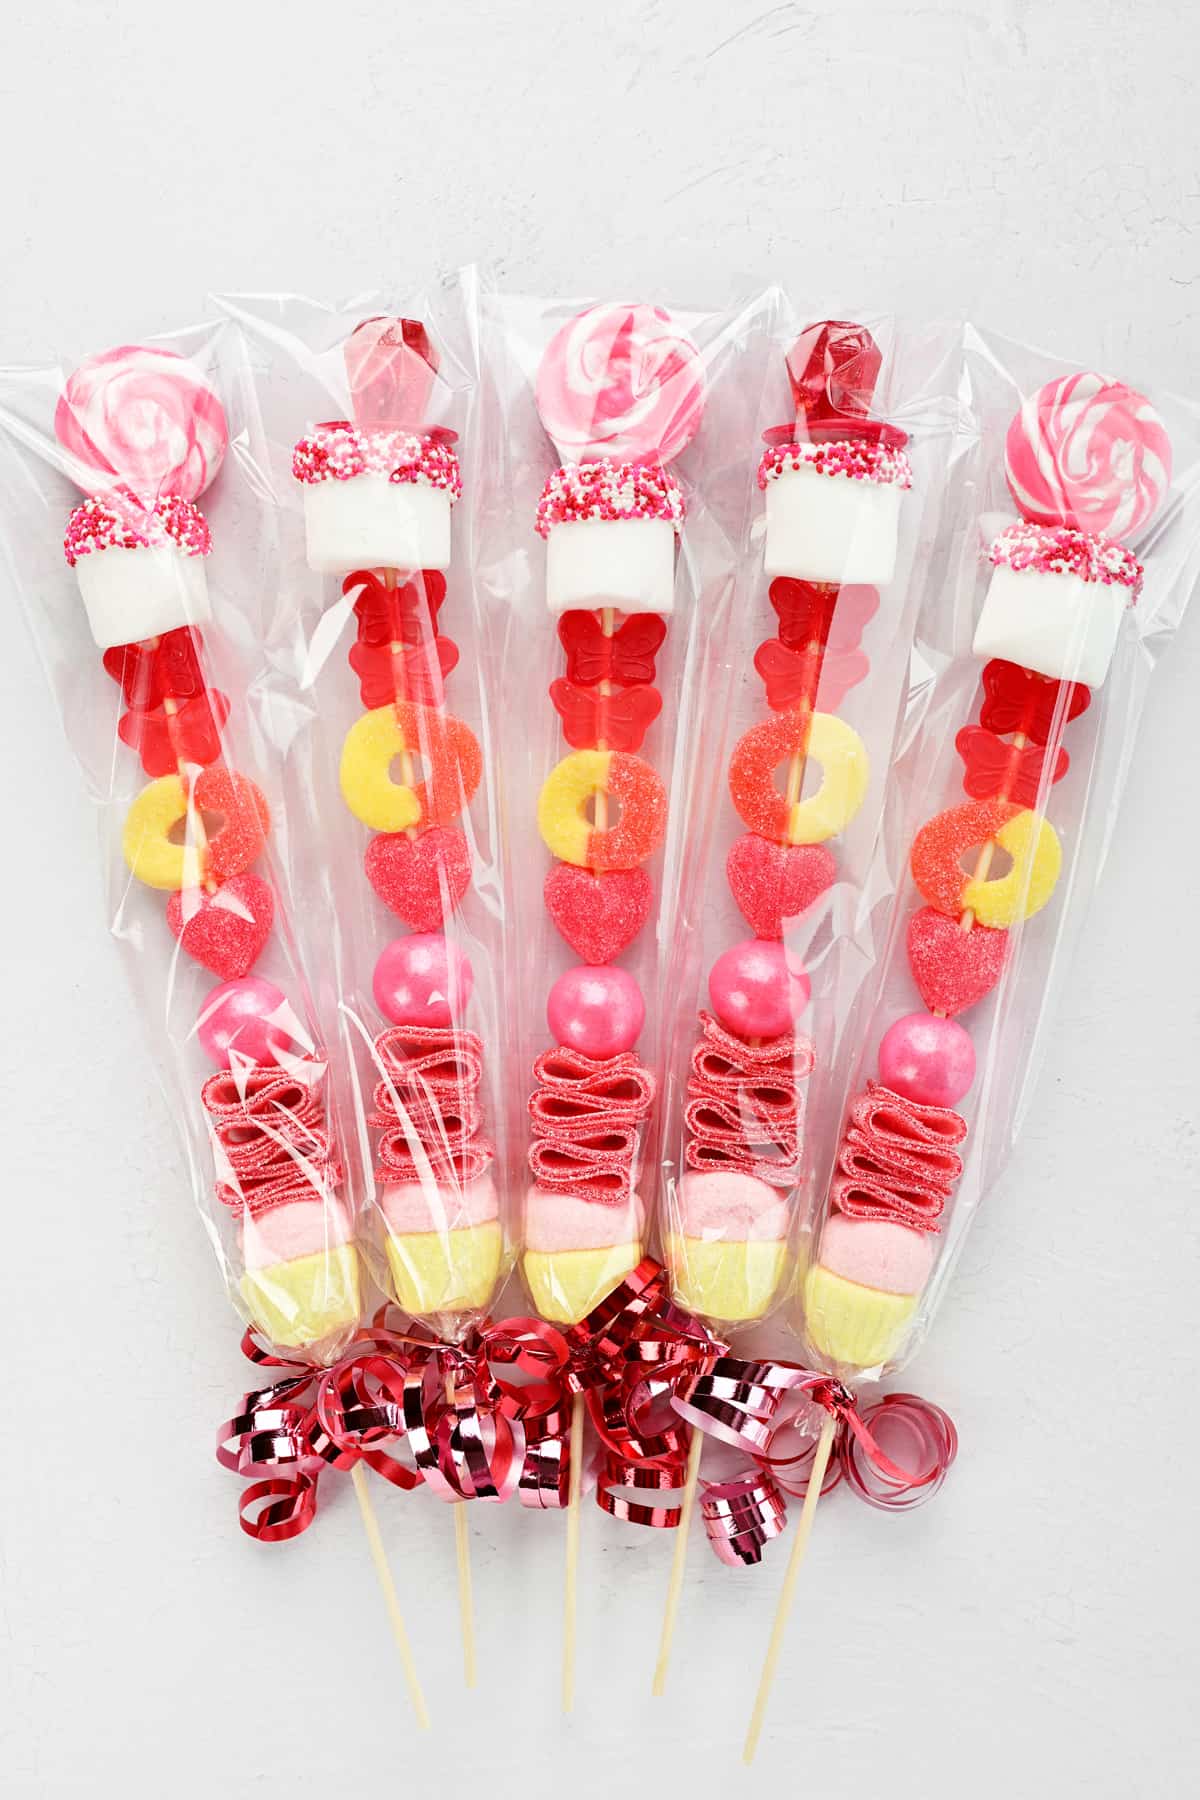 candy sticks packaged in cellophane with pink ribbons.